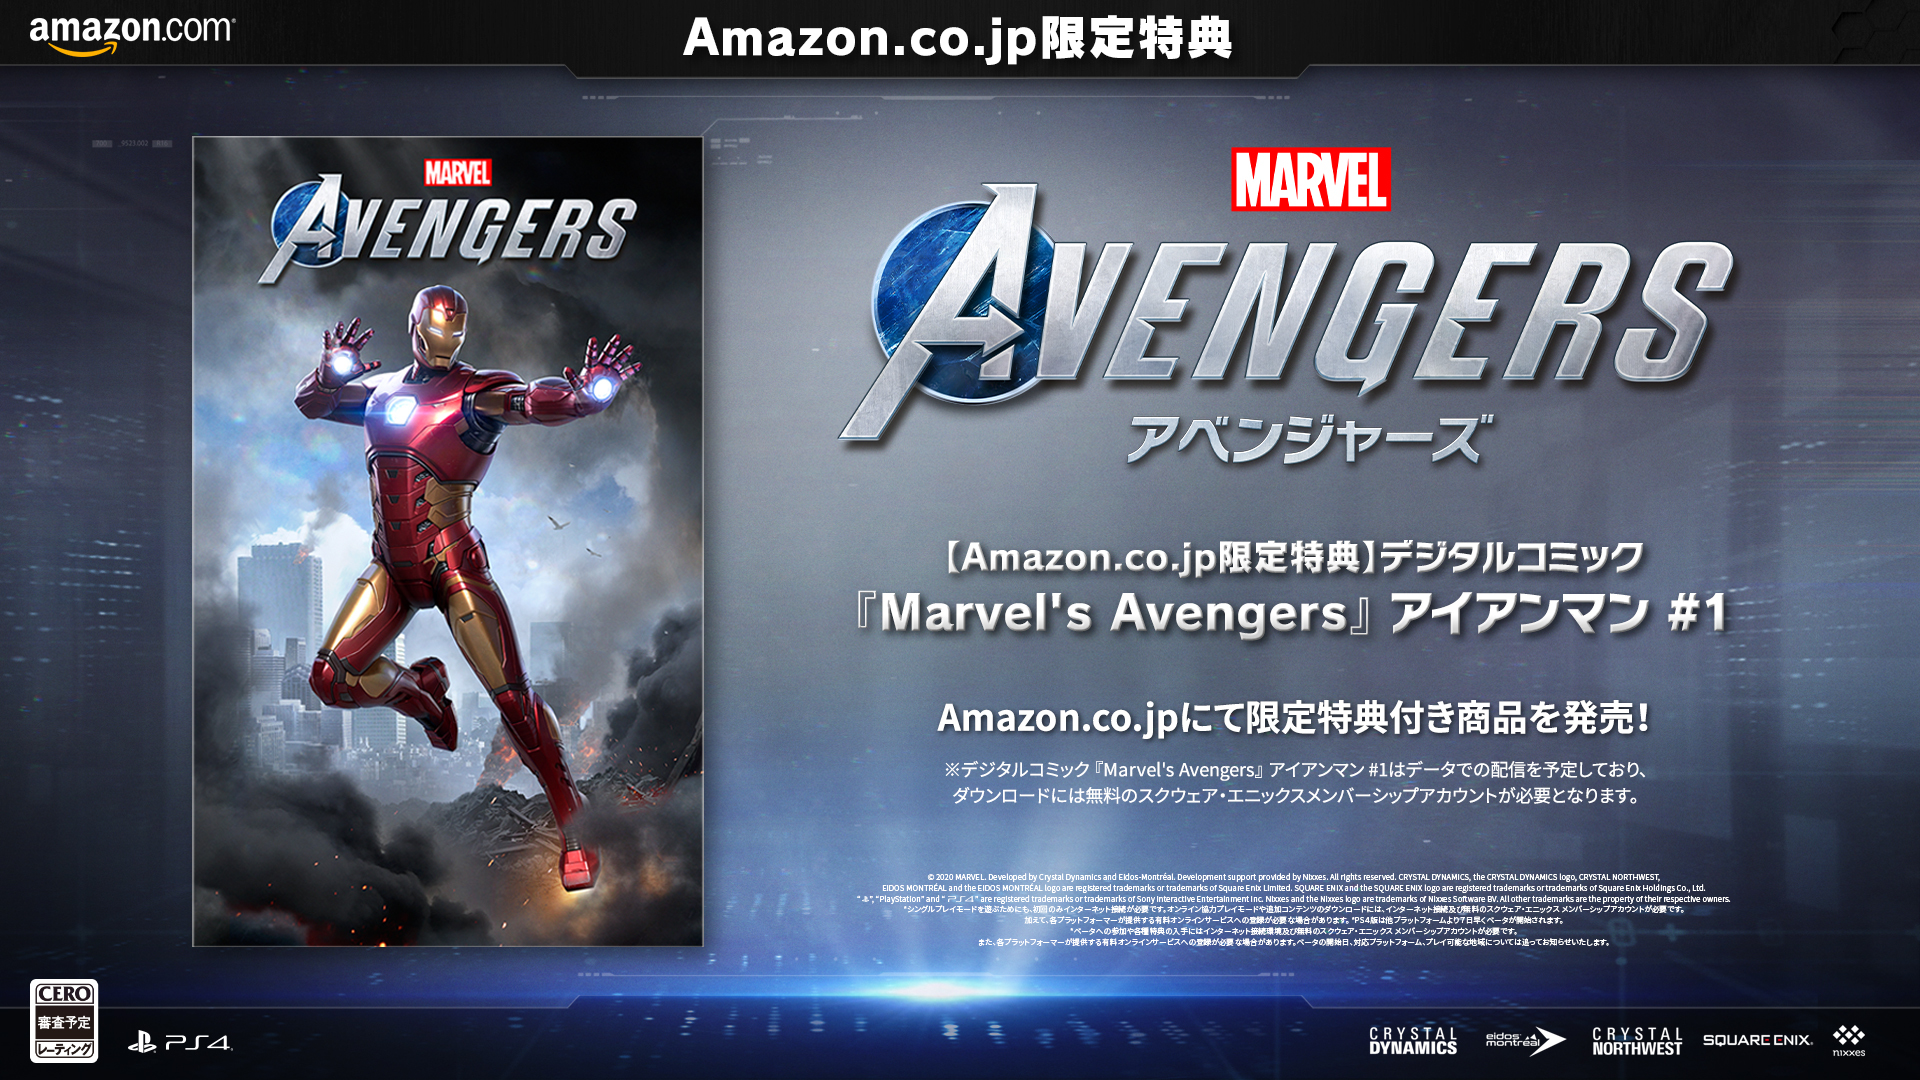 Amazon限定デジタルコミック C)2020 MARVEL. Developed by Crystal Dynamics and Eidos Montréal. Development support provided by Nixxes. All rights reserved.